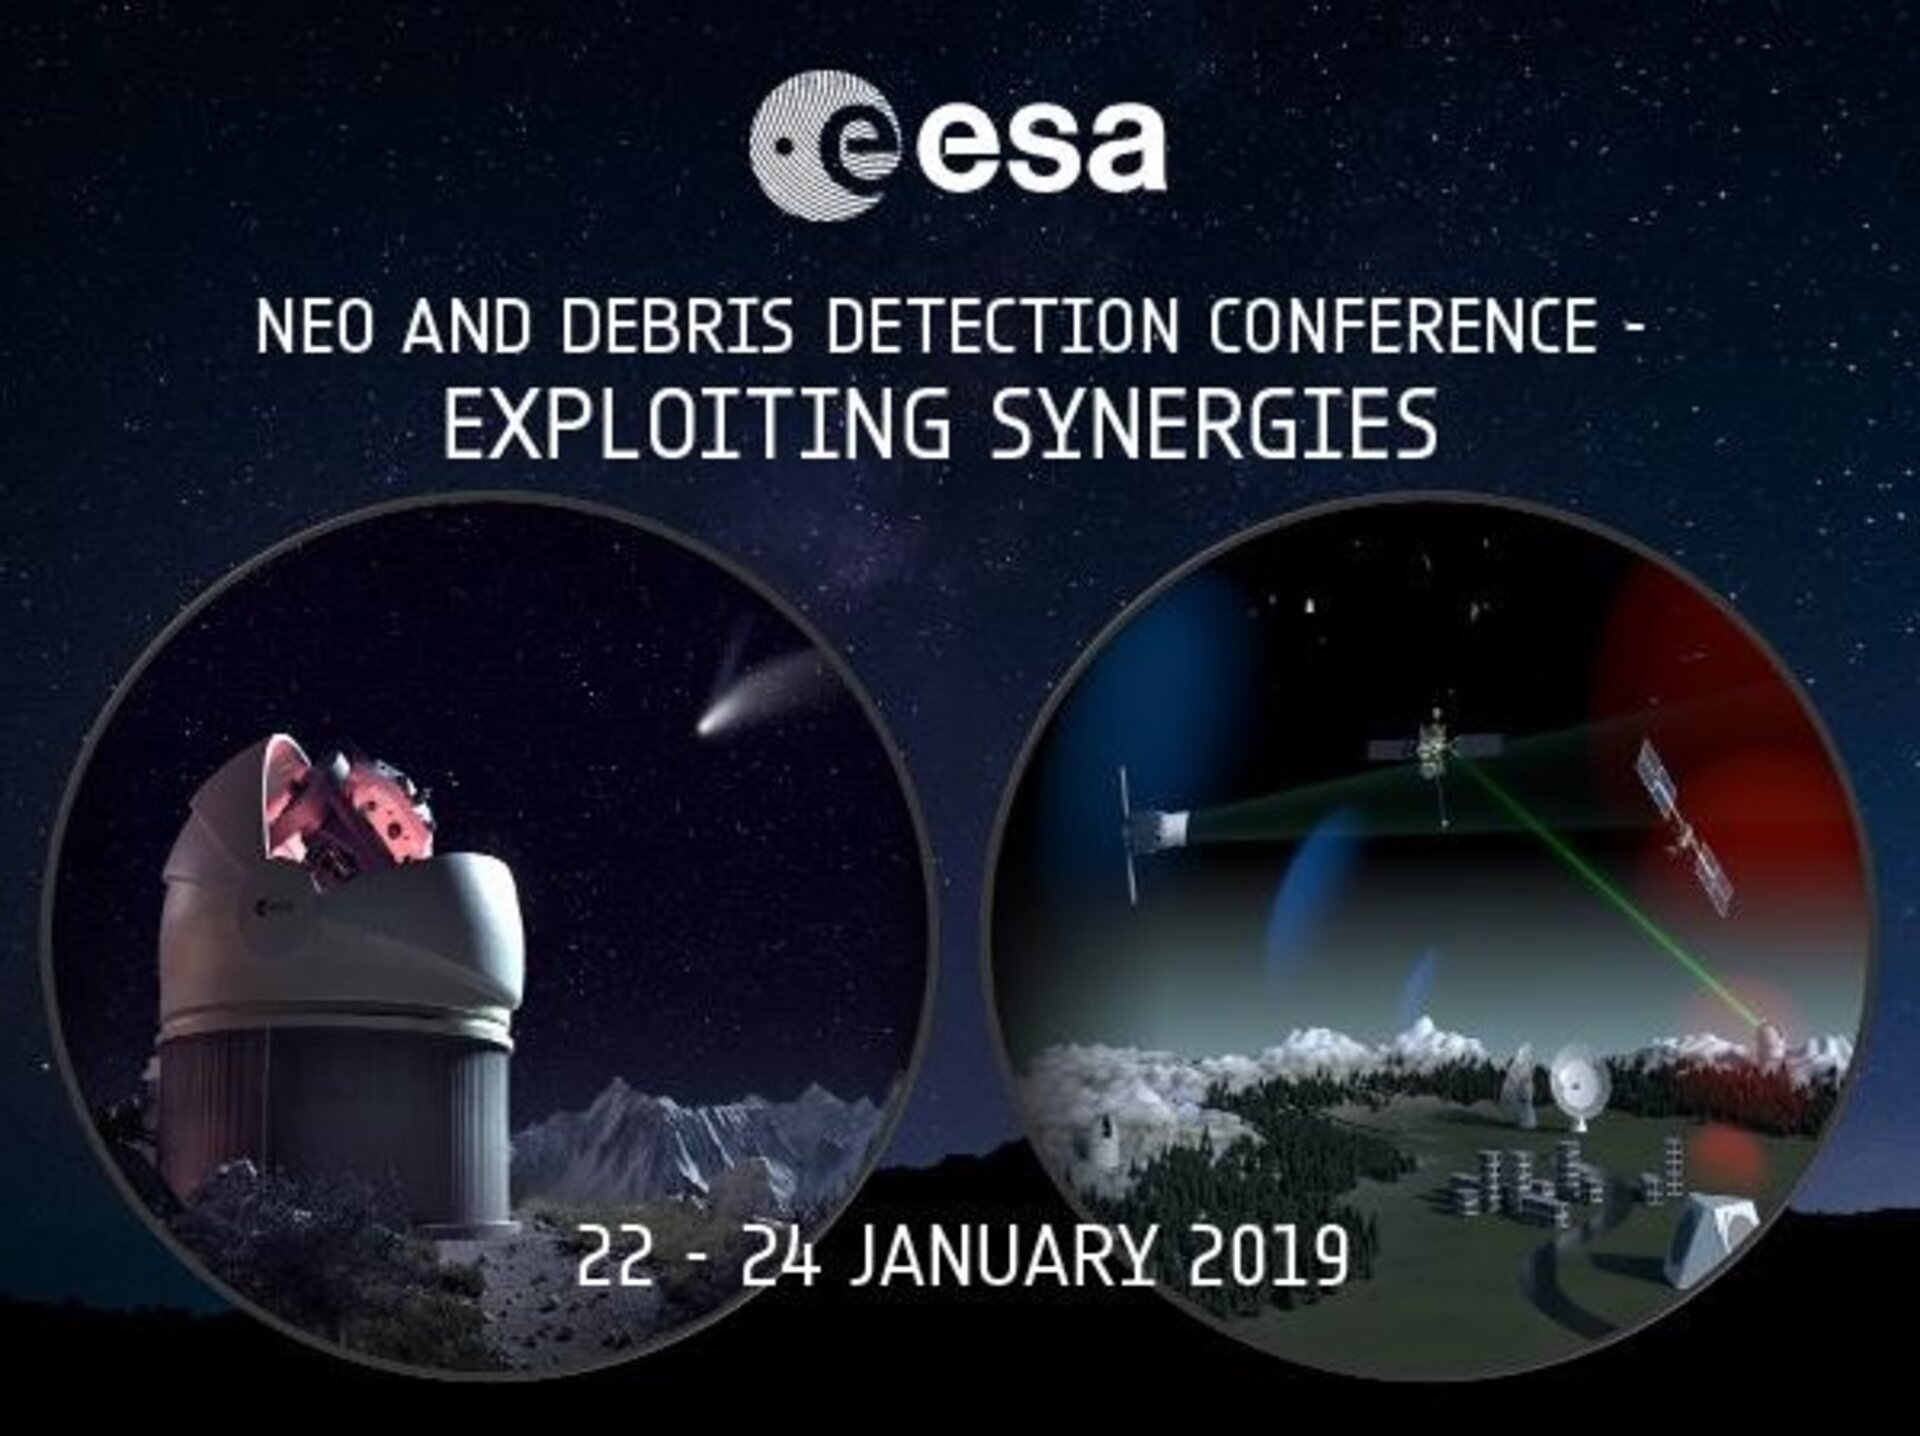 Exploiting Synergies - NEO and Debris Detection Conference